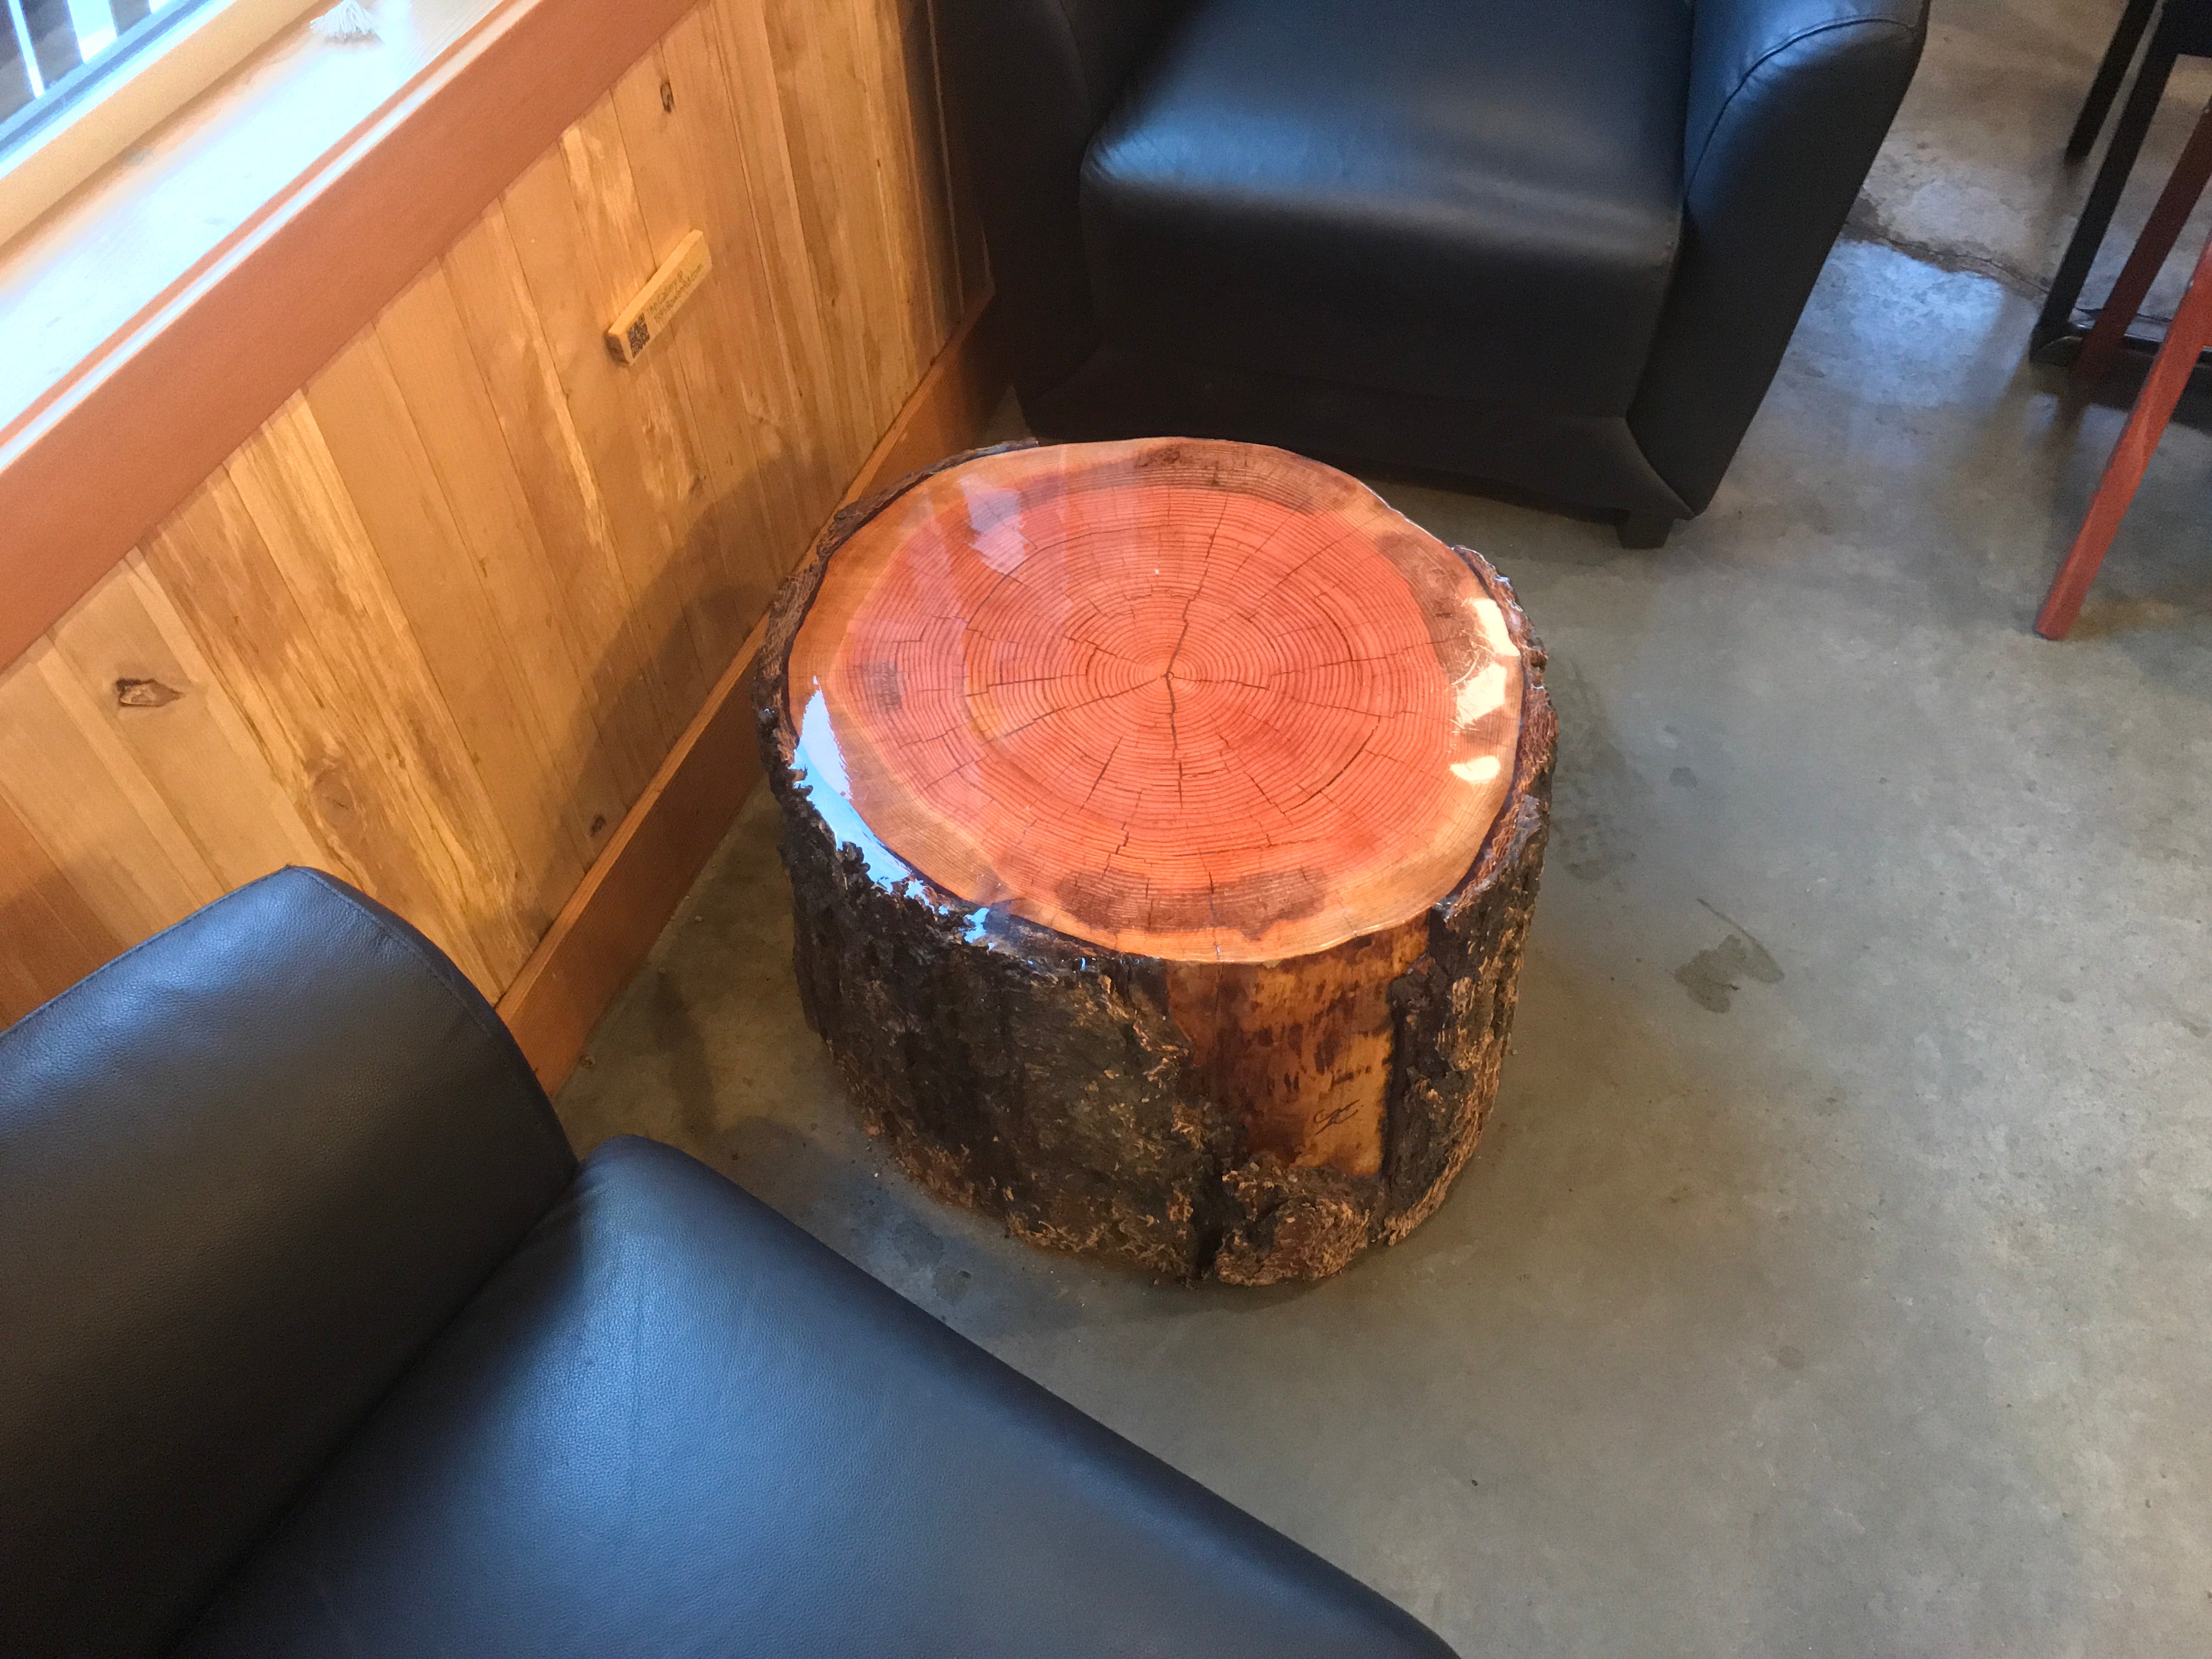 The campfire coffee table